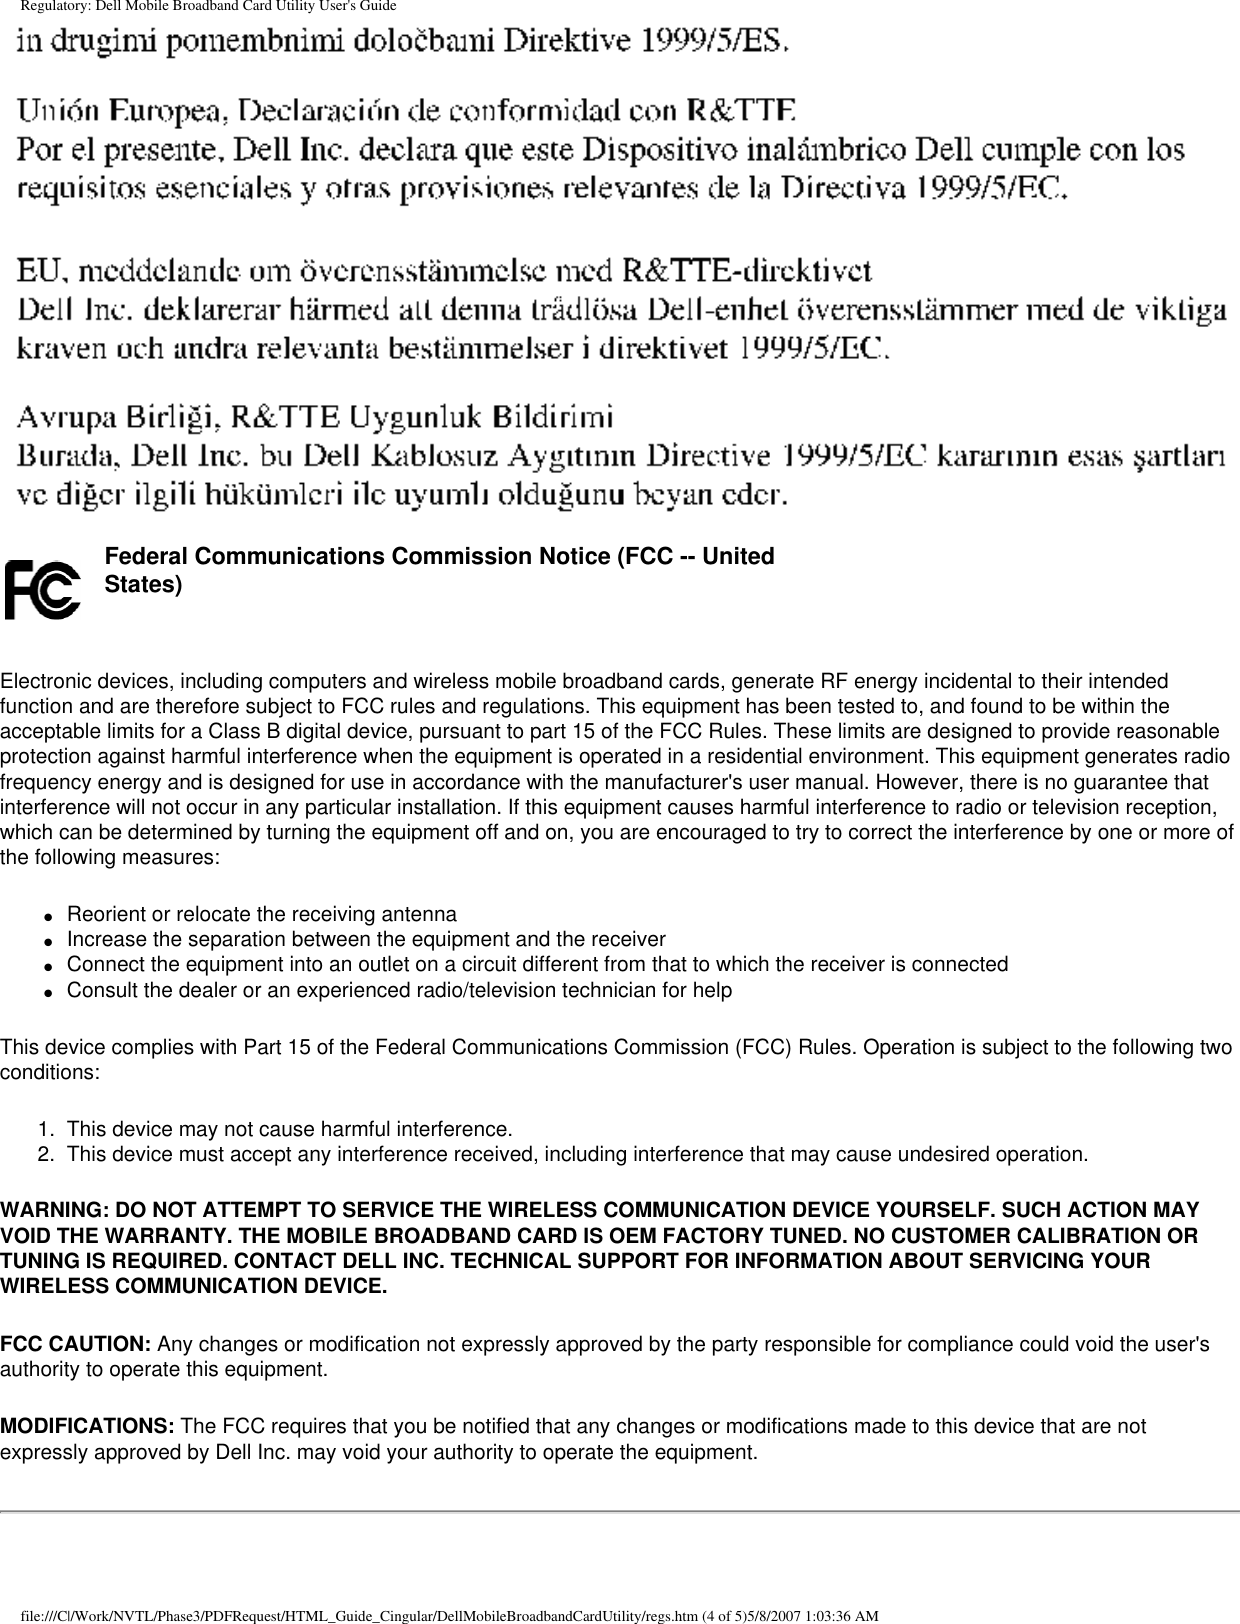 Regulatory: Dell Mobile Broadband Card Utility User&apos;s Guide    Federal Communications Commission Notice (FCC -- United States) Electronic devices, including computers and wireless mobile broadband cards, generate RF energy incidental to their intended function and are therefore subject to FCC rules and regulations. This equipment has been tested to, and found to be within the acceptable limits for a Class B digital device, pursuant to part 15 of the FCC Rules. These limits are designed to provide reasonable protection against harmful interference when the equipment is operated in a residential environment. This equipment generates radio frequency energy and is designed for use in accordance with the manufacturer&apos;s user manual. However, there is no guarantee that interference will not occur in any particular installation. If this equipment causes harmful interference to radio or television reception, which can be determined by turning the equipment off and on, you are encouraged to try to correct the interference by one or more of the following measures:●     Reorient or relocate the receiving antenna●     Increase the separation between the equipment and the receiver●     Connect the equipment into an outlet on a circuit different from that to which the receiver is connected●     Consult the dealer or an experienced radio/television technician for helpThis device complies with Part 15 of the Federal Communications Commission (FCC) Rules. Operation is subject to the following two conditions:1.  This device may not cause harmful interference.2.  This device must accept any interference received, including interference that may cause undesired operation.WARNING: DO NOT ATTEMPT TO SERVICE THE WIRELESS COMMUNICATION DEVICE YOURSELF. SUCH ACTION MAY VOID THE WARRANTY. THE MOBILE BROADBAND CARD IS OEM FACTORY TUNED. NO CUSTOMER CALIBRATION OR TUNING IS REQUIRED. CONTACT DELL INC. TECHNICAL SUPPORT FOR INFORMATION ABOUT SERVICING YOUR WIRELESS COMMUNICATION DEVICE.FCC CAUTION: Any changes or modification not expressly approved by the party responsible for compliance could void the user&apos;s authority to operate this equipment.MODIFICATIONS: The FCC requires that you be notified that any changes or modifications made to this device that are not expressly approved by Dell Inc. may void your authority to operate the equipment.file:///C|/Work/NVTL/Phase3/PDFRequest/HTML_Guide_Cingular/DellMobileBroadbandCardUtility/regs.htm (4 of 5)5/8/2007 1:03:36 AM